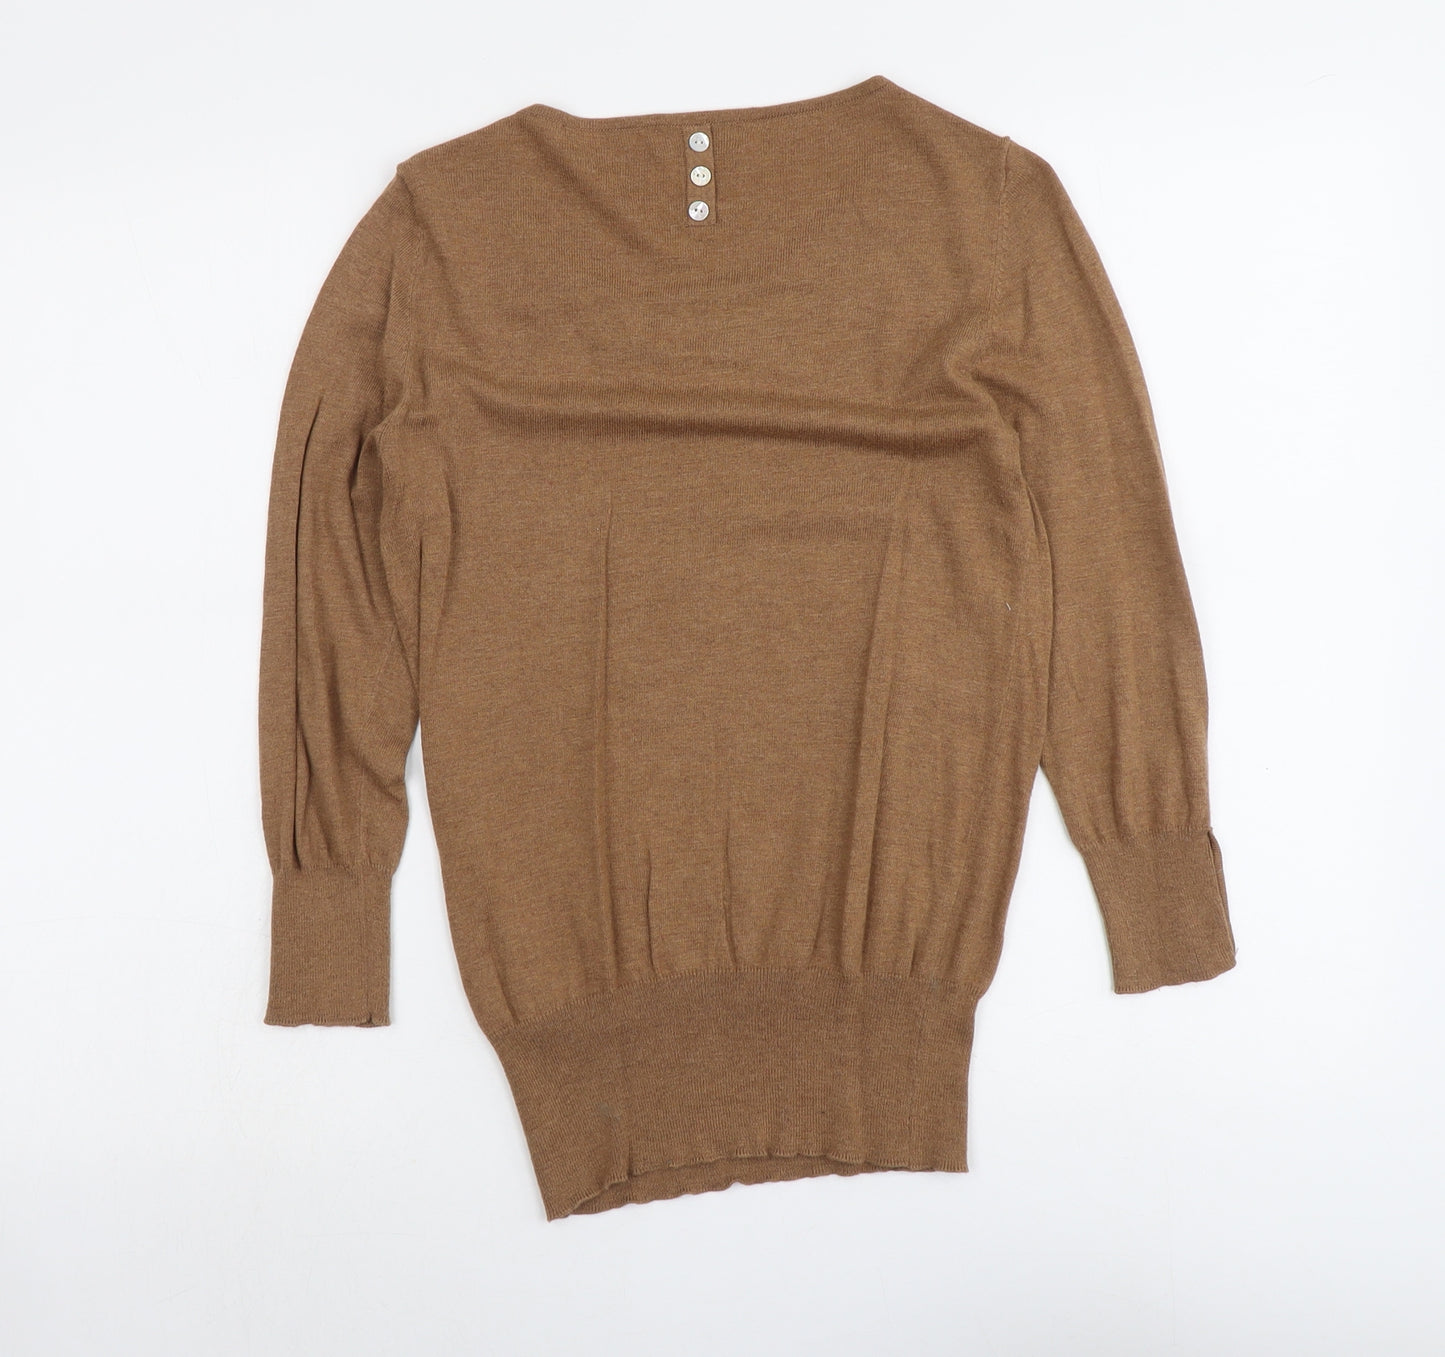 NEXT Womens Brown Boat Neck Cotton Pullover Jumper Size 8